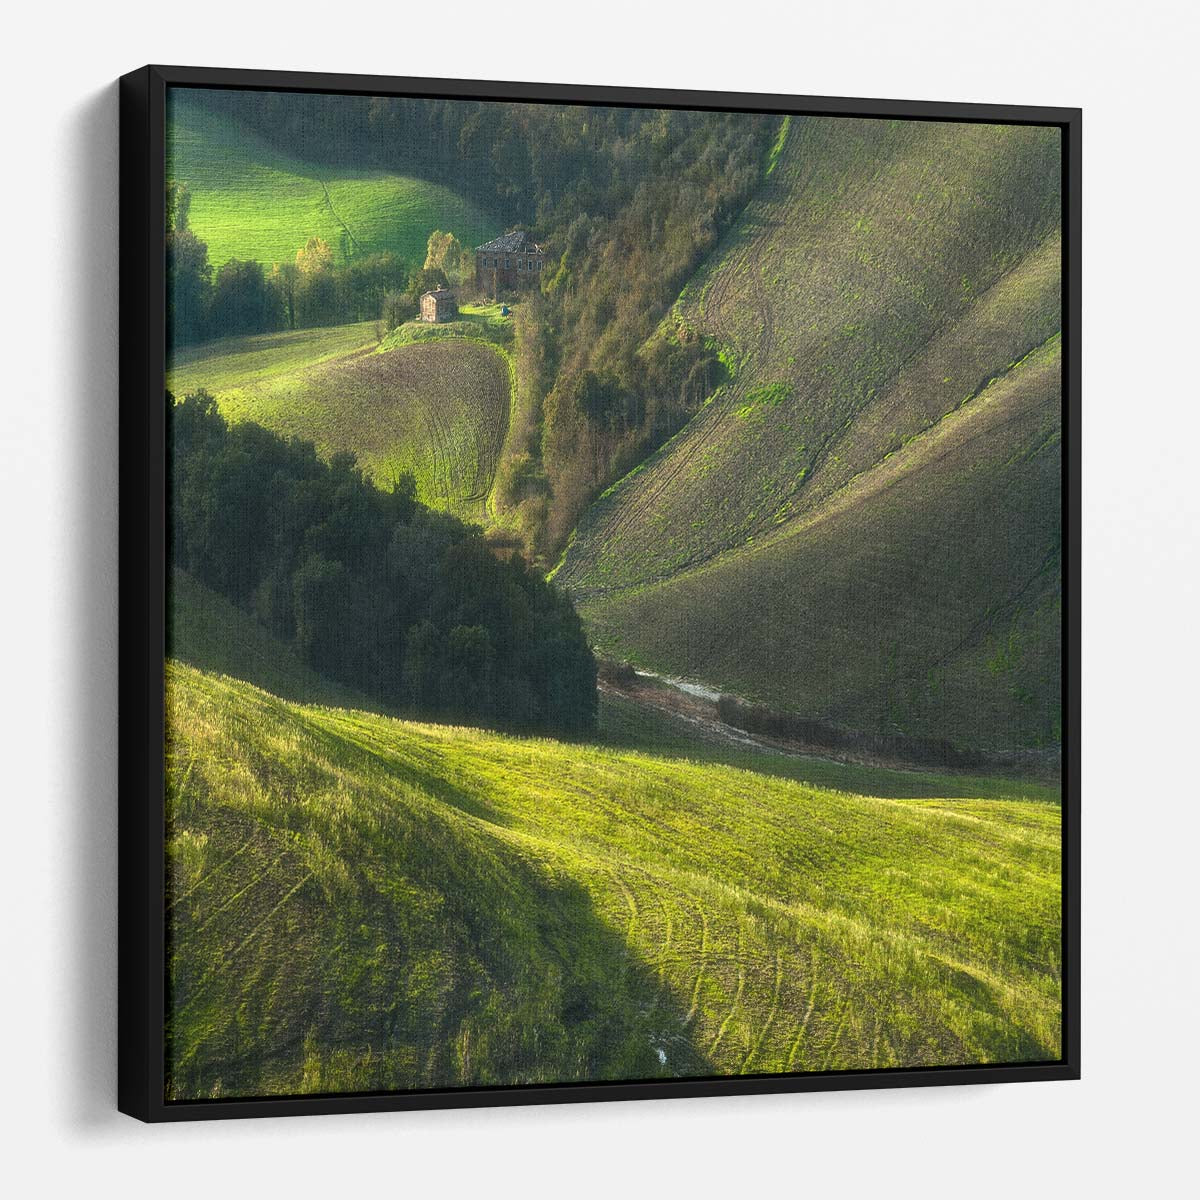 Rolling Hills & Farm Landscape of Tuscany Countryside Wall Art by Luxuriance Designs. Made in USA.